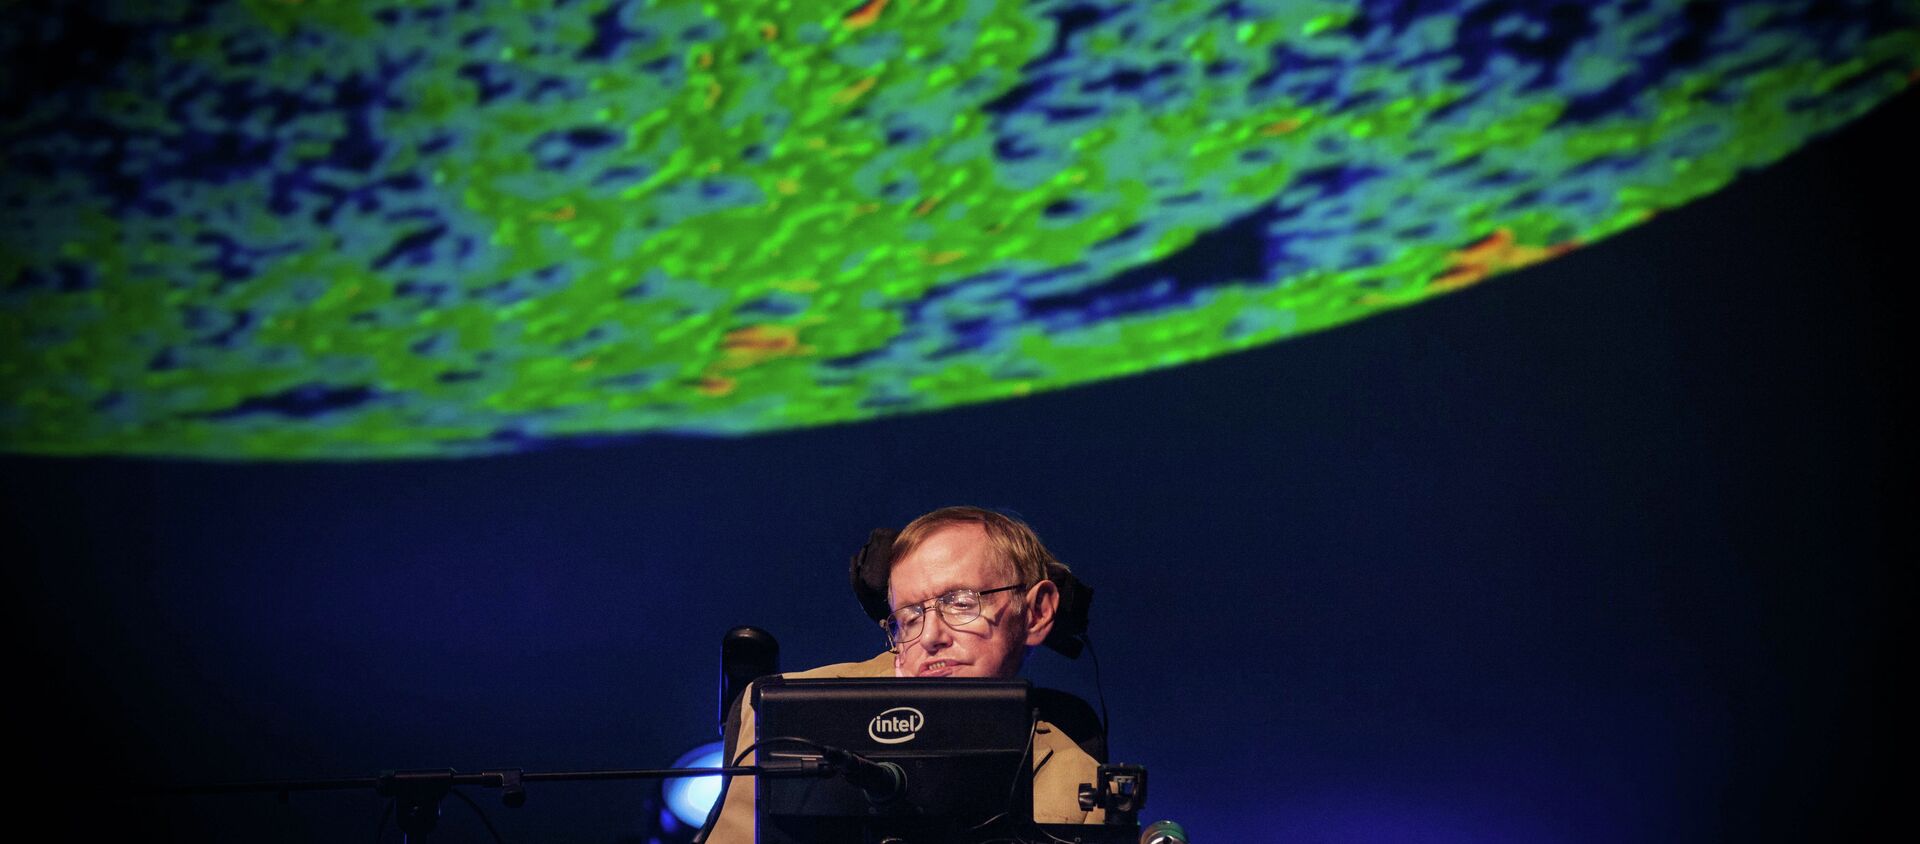 British theoretical physicist professor Stephen Hawking gives a lecture during the Starmus Festival on the Spanish Canary island of Tenerife on September 23, 2014 - Sputnik Türkiye, 1920, 24.09.2016